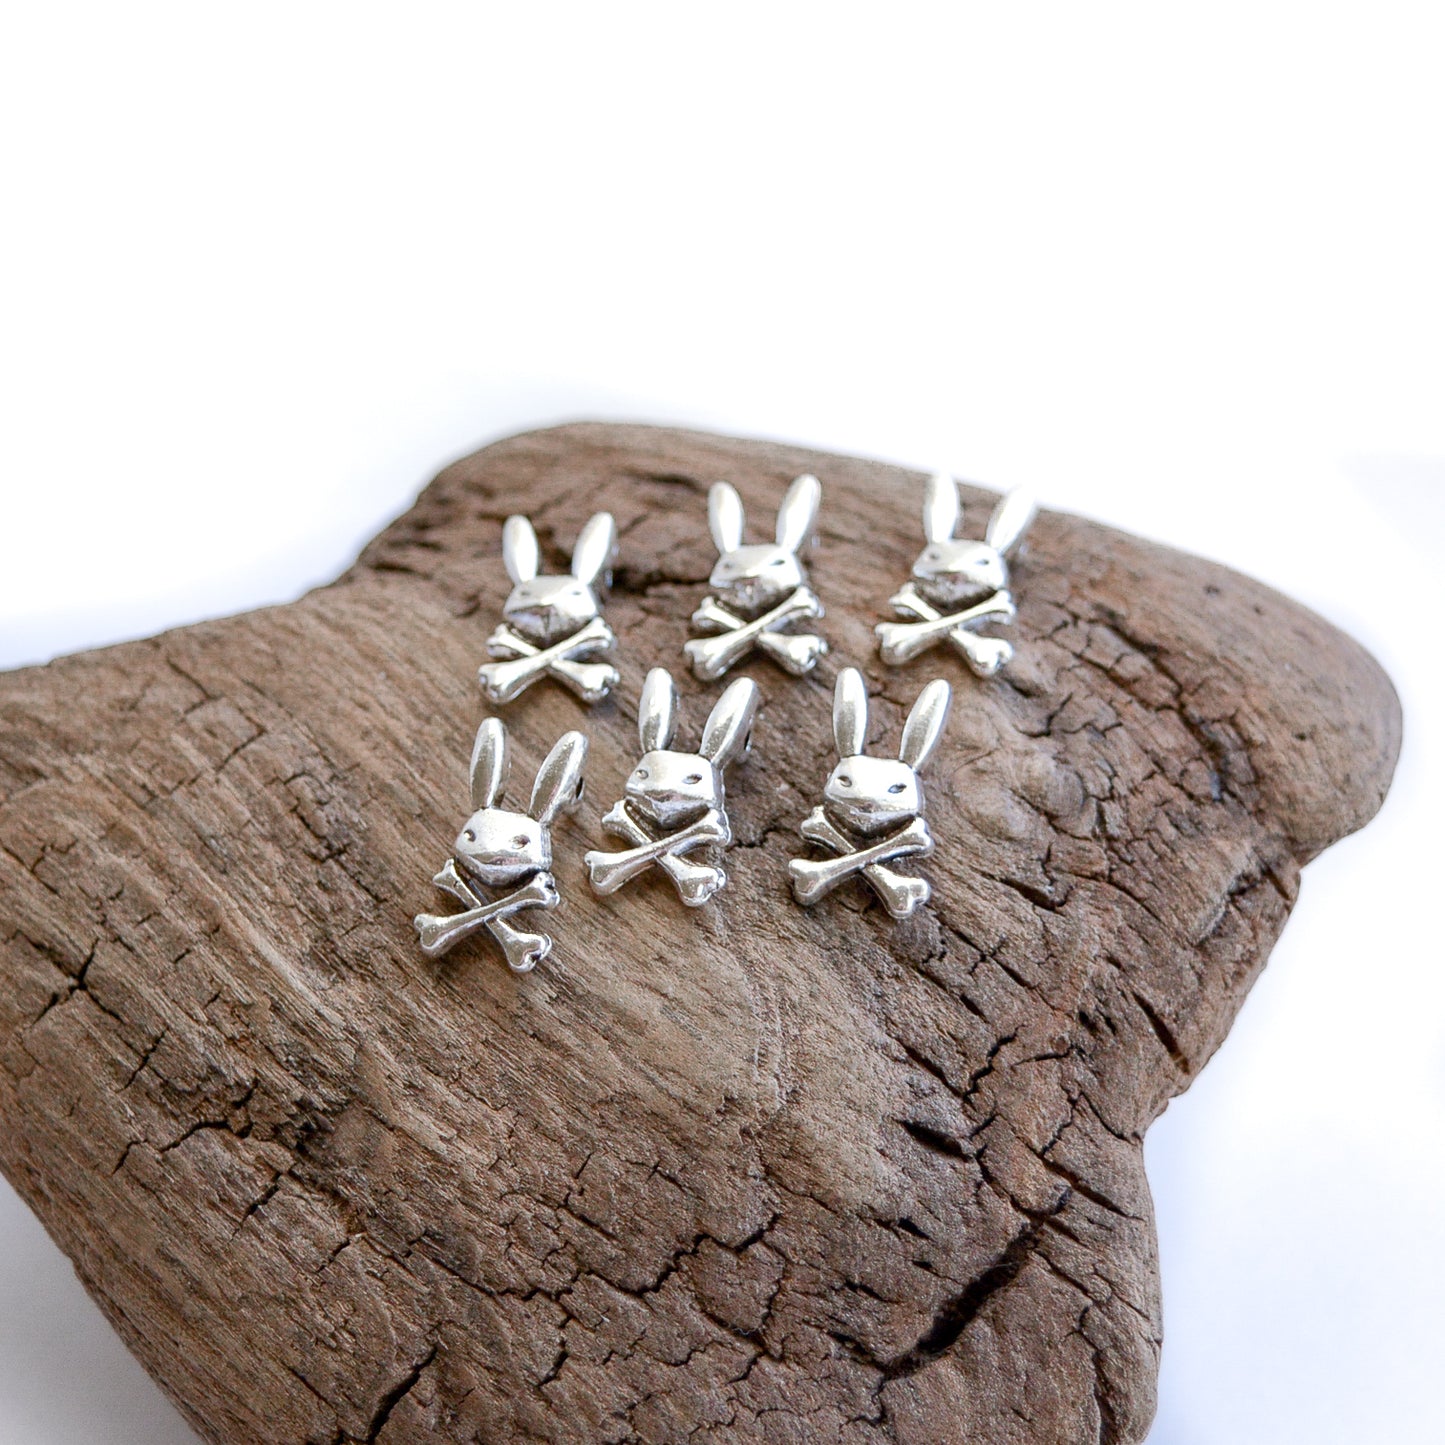 Skull and Crossbones Bunny Charms 16x8mm in Antiqued Silver Finish